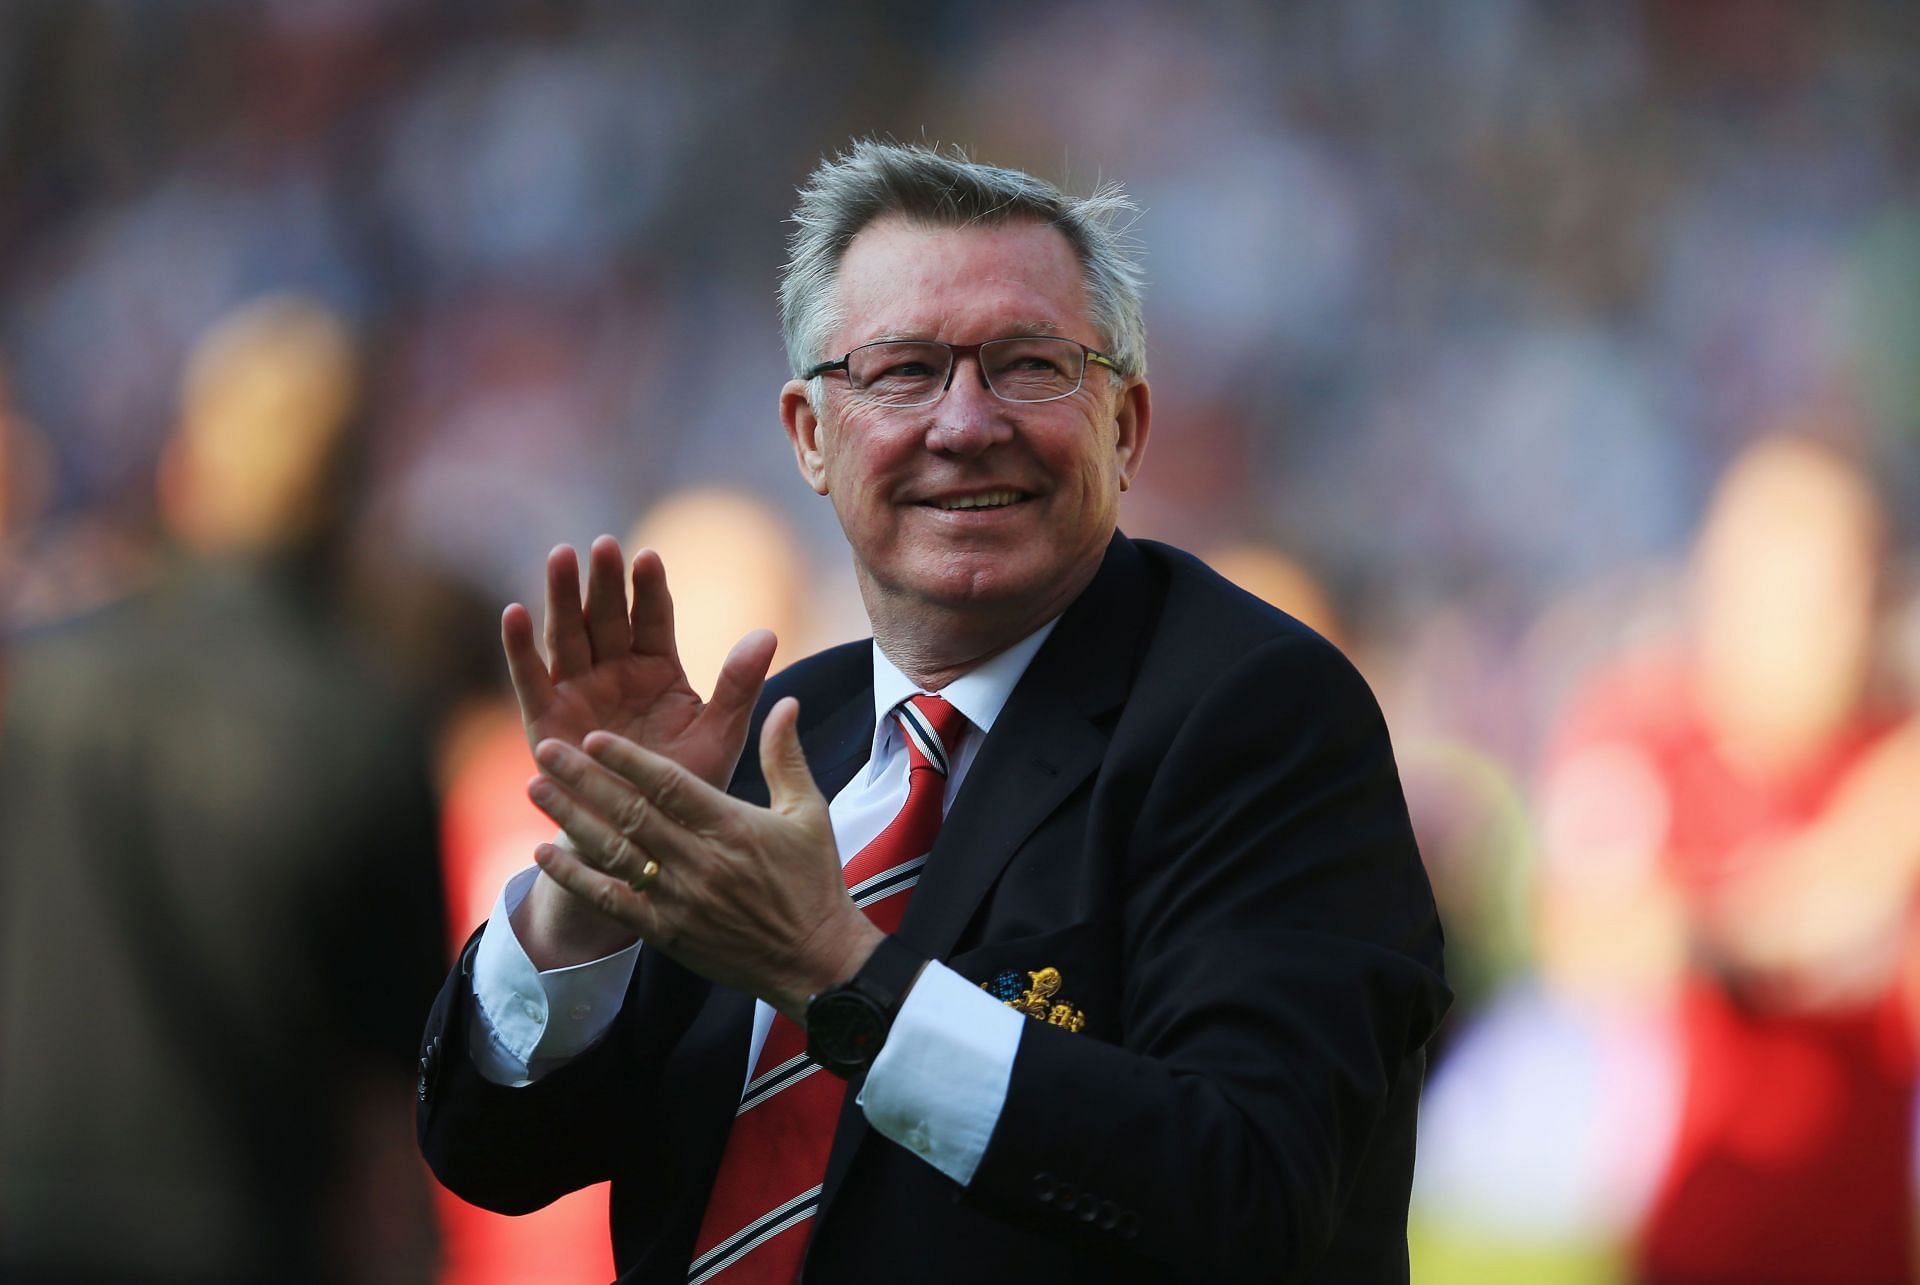 Sir Alex Ferguson is the most decorated manager in the history of the Premier League